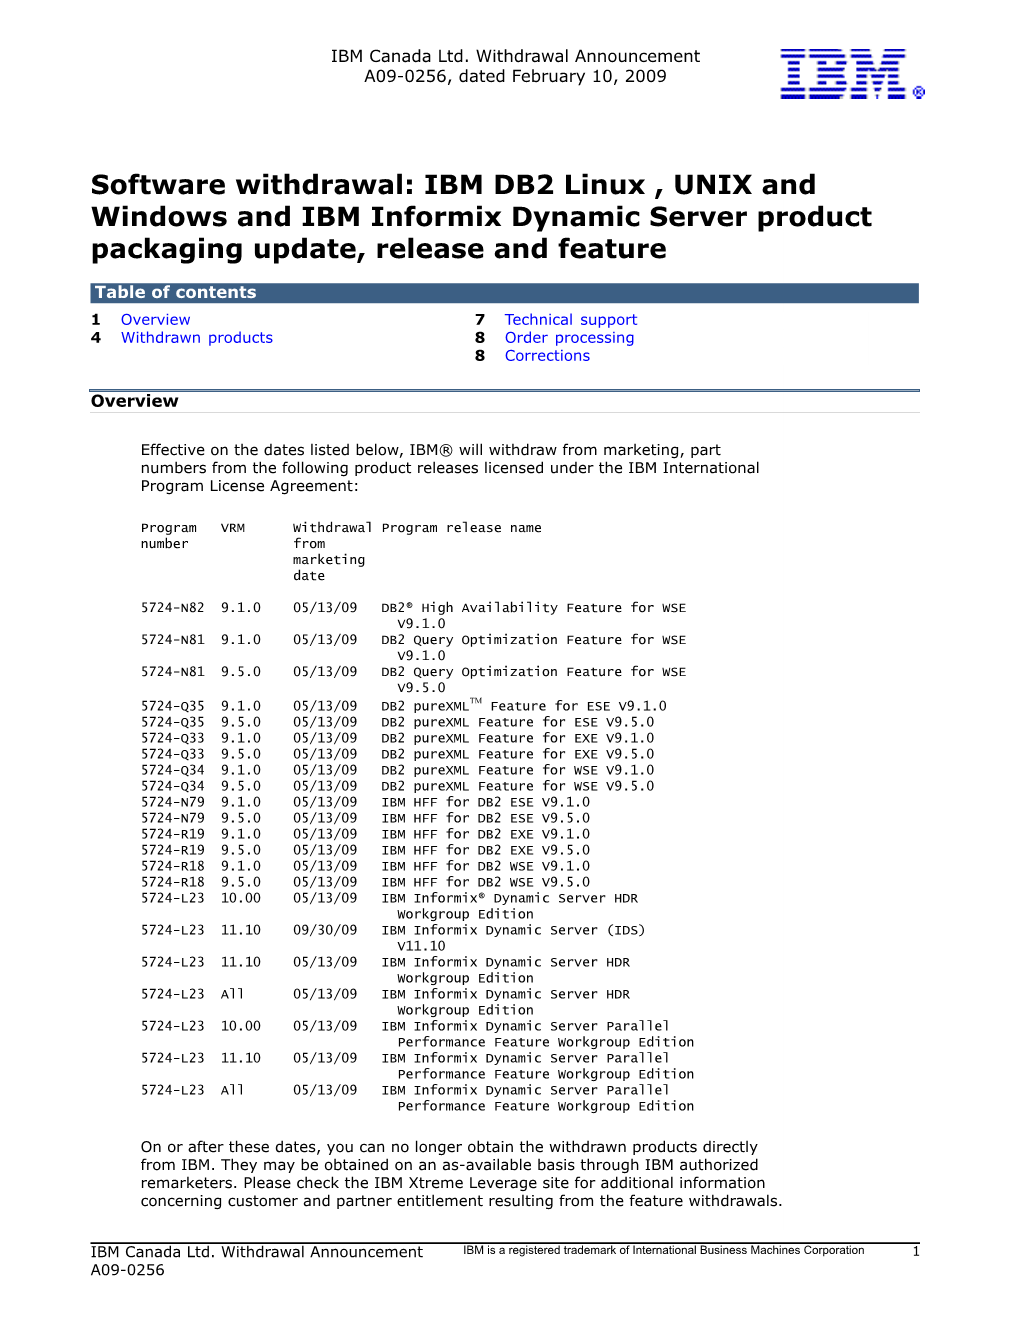 Software Withdrawal: IBM DB2 Linux , UNIX and Windows and IBM Informix Dynamic Server Product Packaging Update, Release and Feature